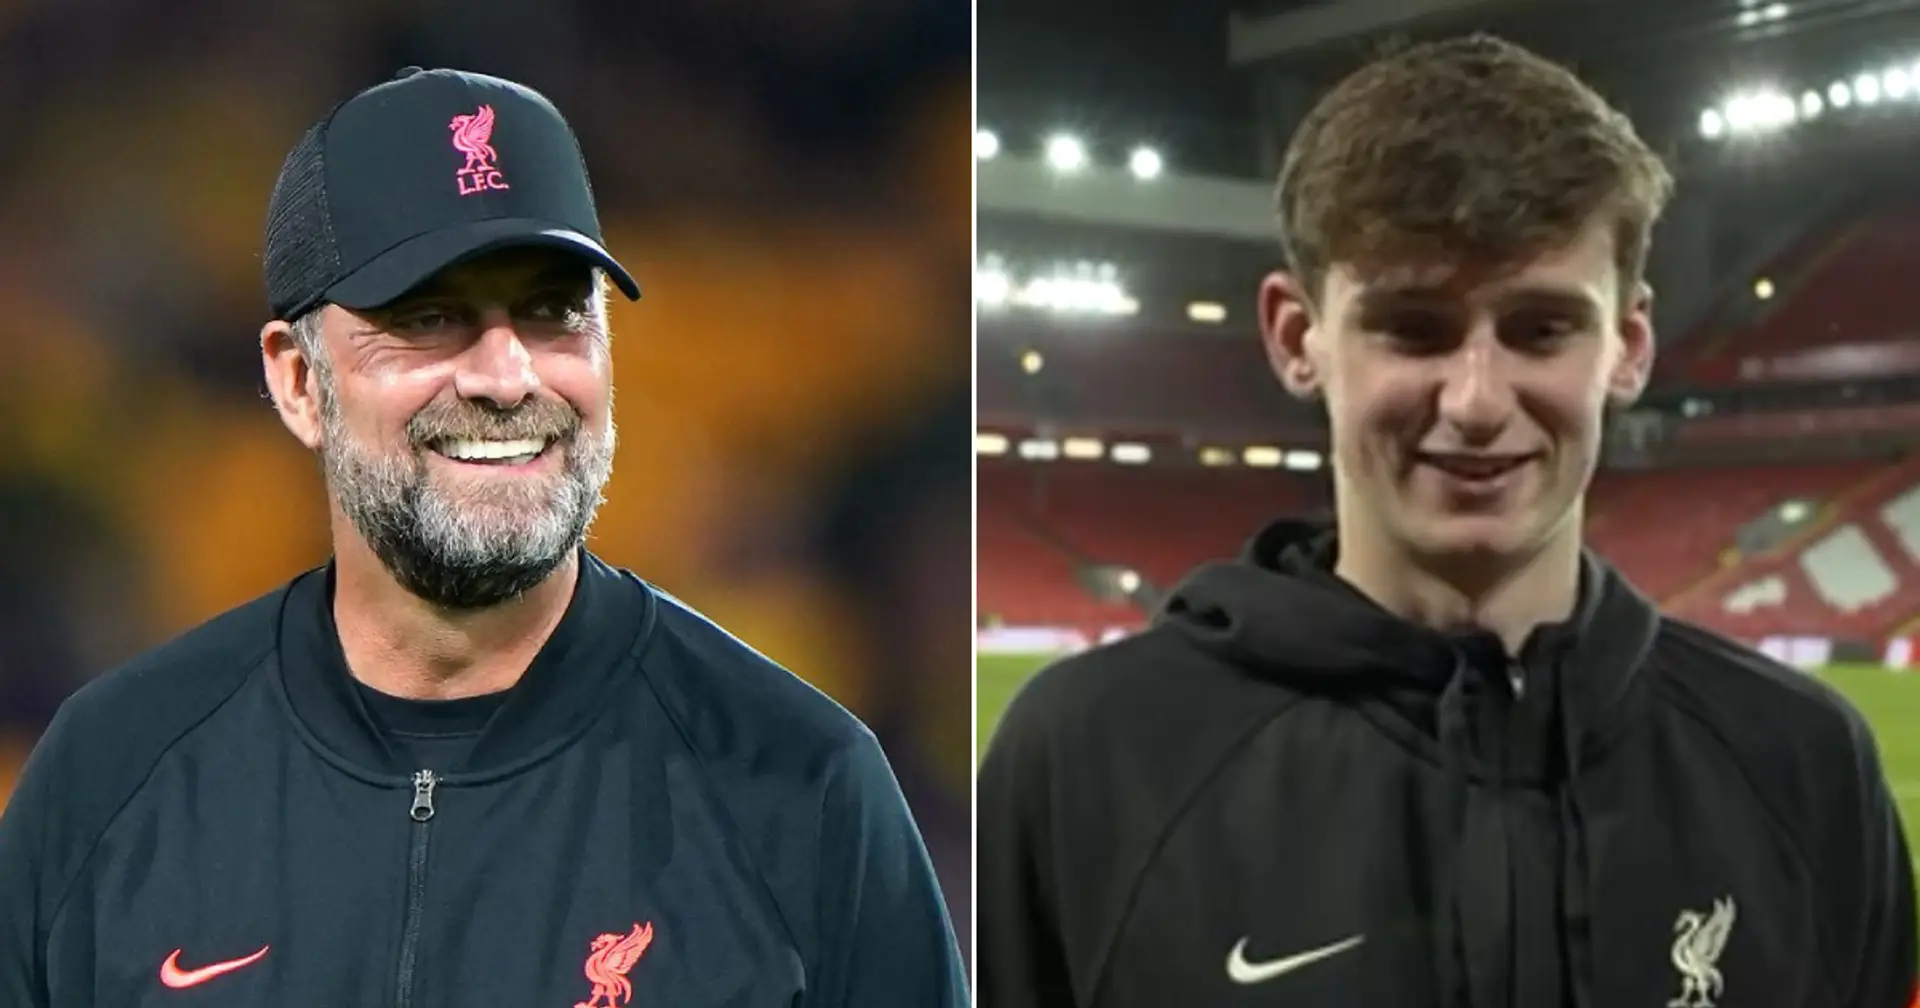 'If you play bad, it’s on me': Tyler Morton on what Klopp told him before Liverpool debut